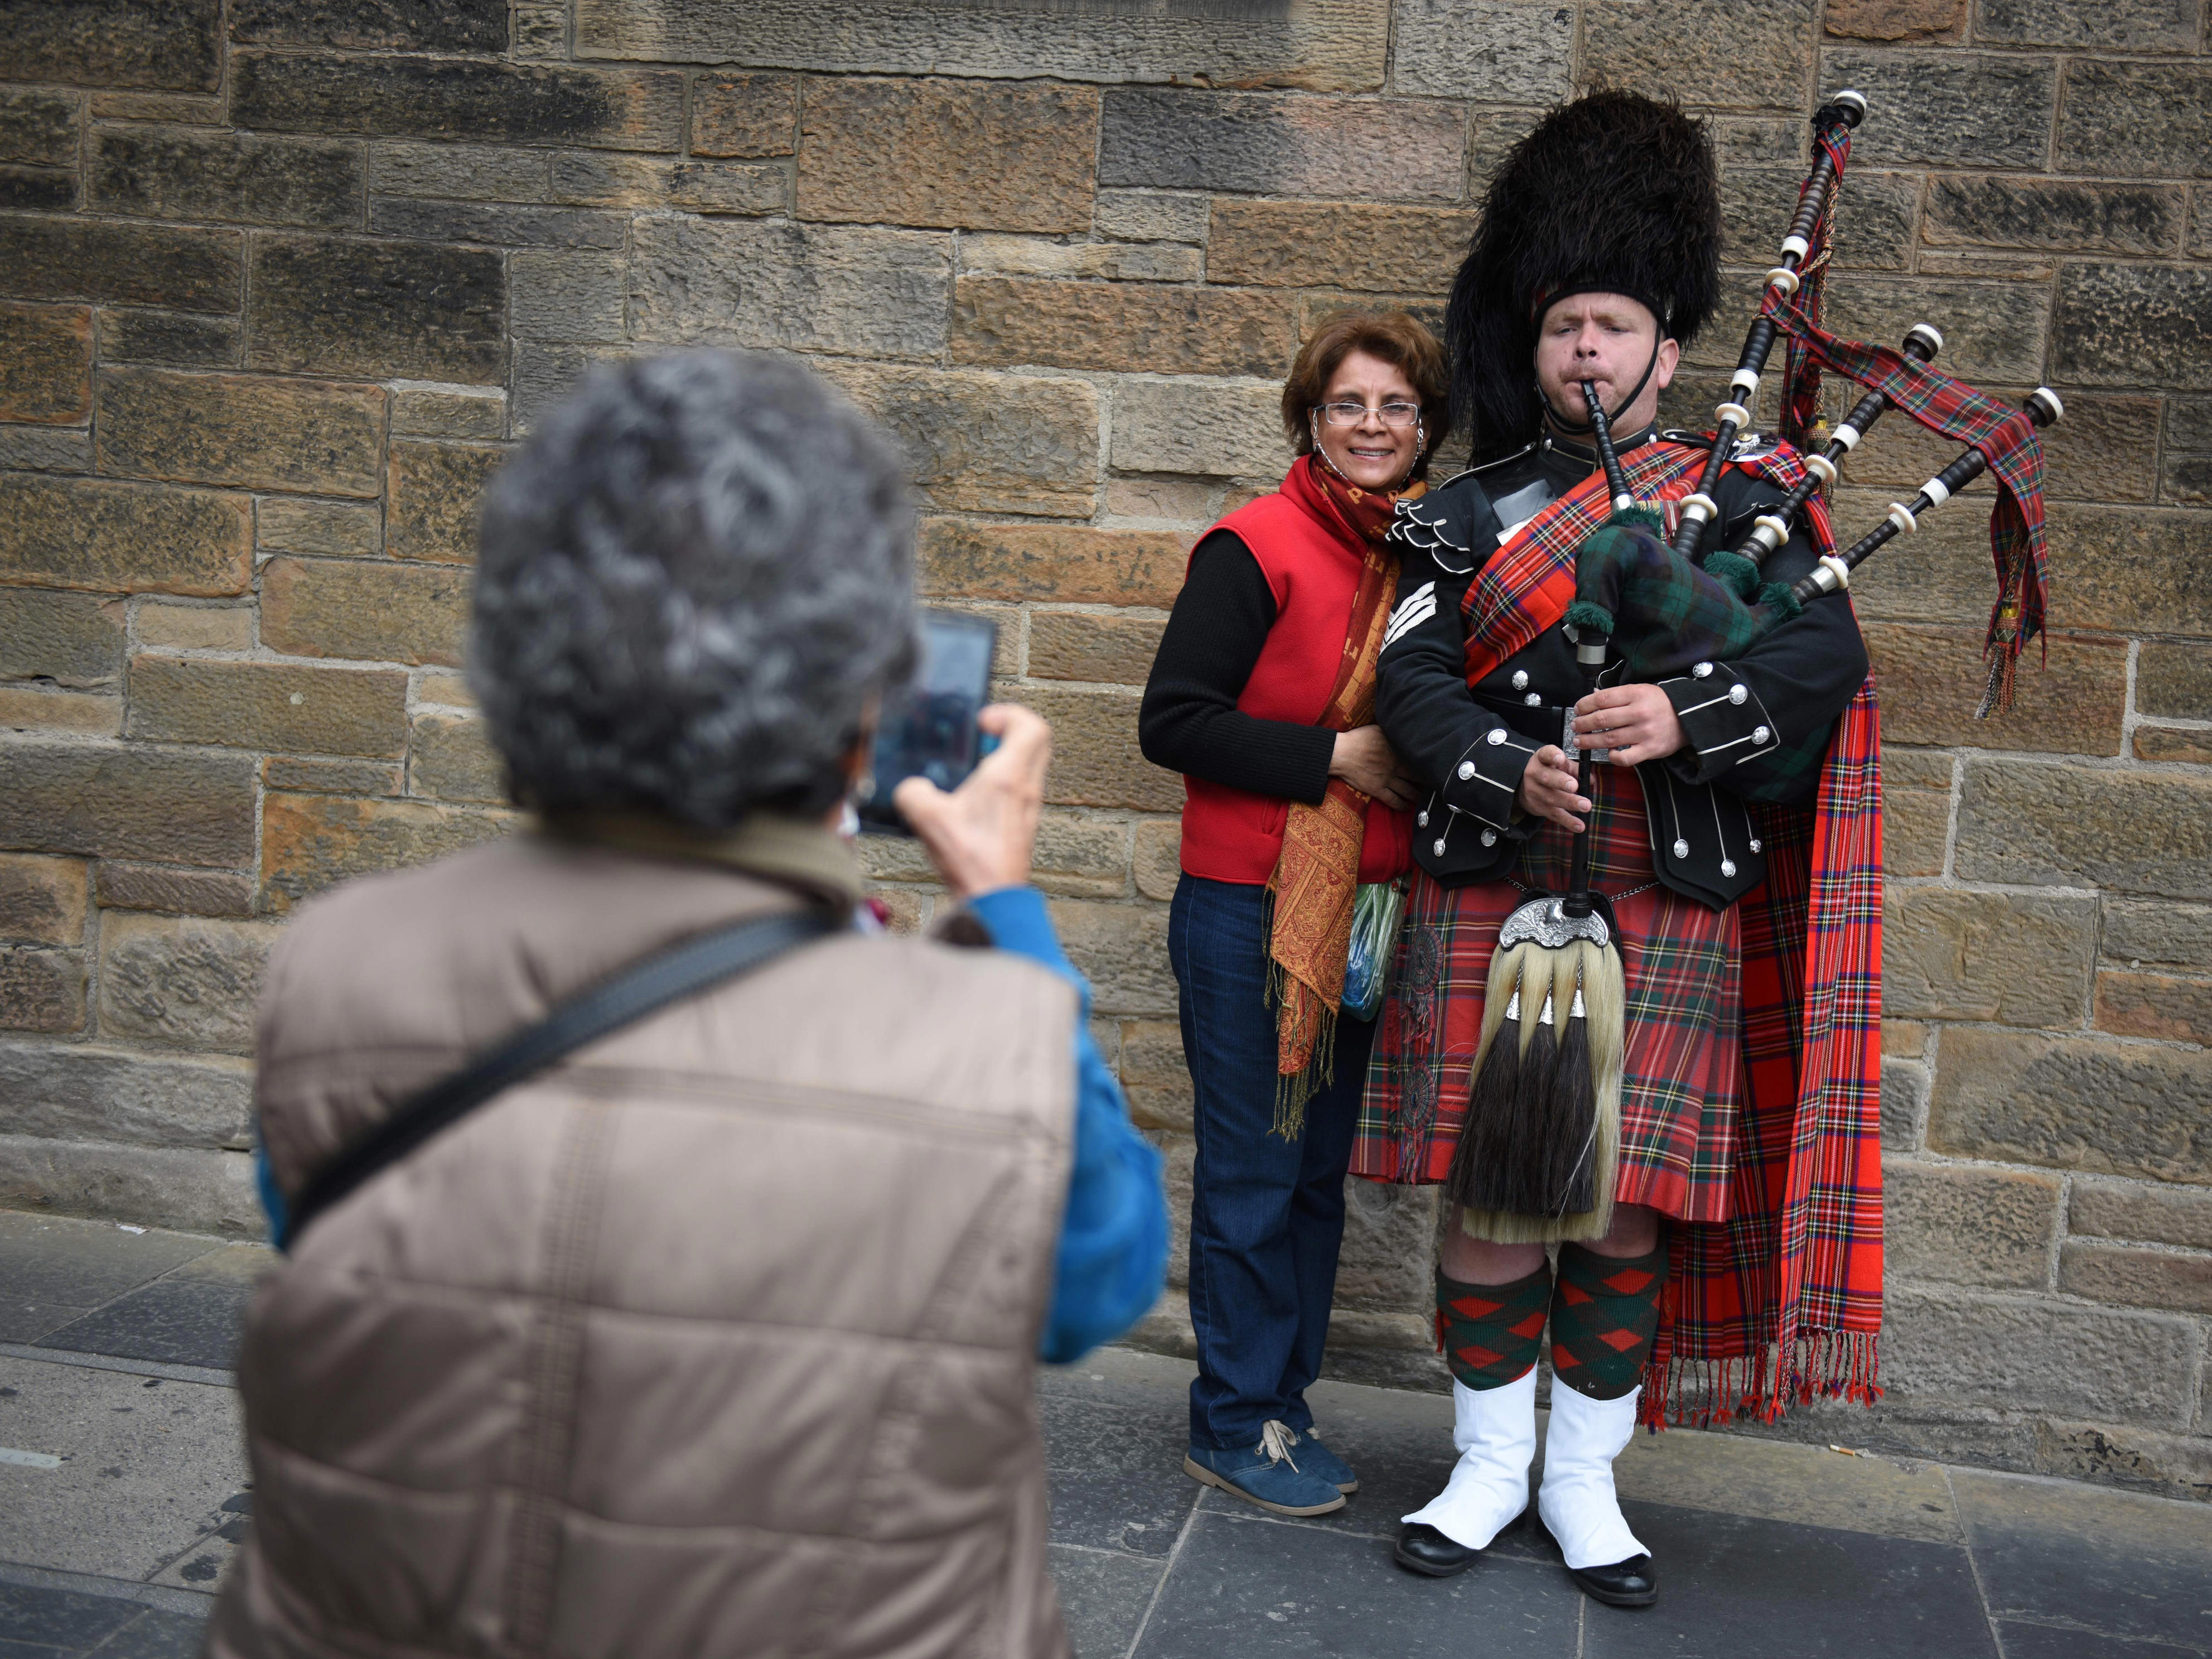 <ul class="summary-list"> <li>Insider's lifestyle reporters grew up in Glasgow, Scotland's largest city.</li> <li>They shared their tips on how to blend in with the locals during your visit to Scotland.</li> <li>Avoid talking about soccer when visiting Glasgow and don't photograph bagpipers.</li> </ul><div class="read-original">Read the original article on <a href="https://www.insider.com/scotland-tips-how-tourists-can-pass-as-locals-2023-10">Insider</a></div>